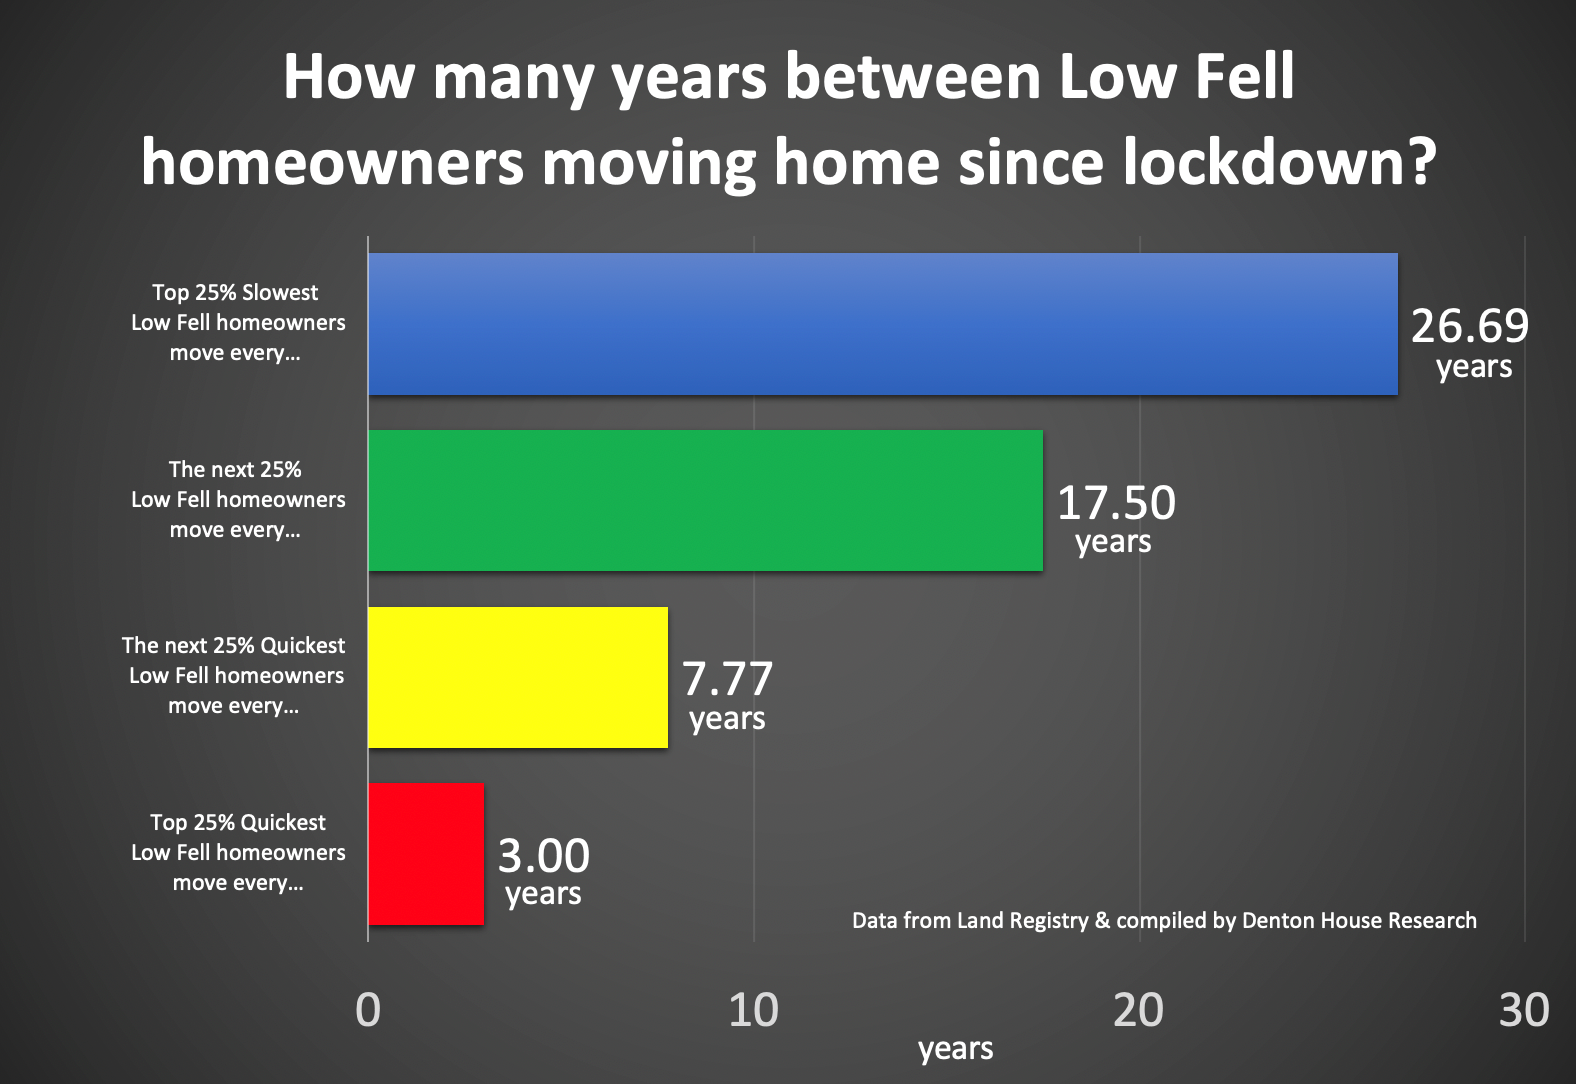 How many years between Low Fell homeowners moving home since lockdown?